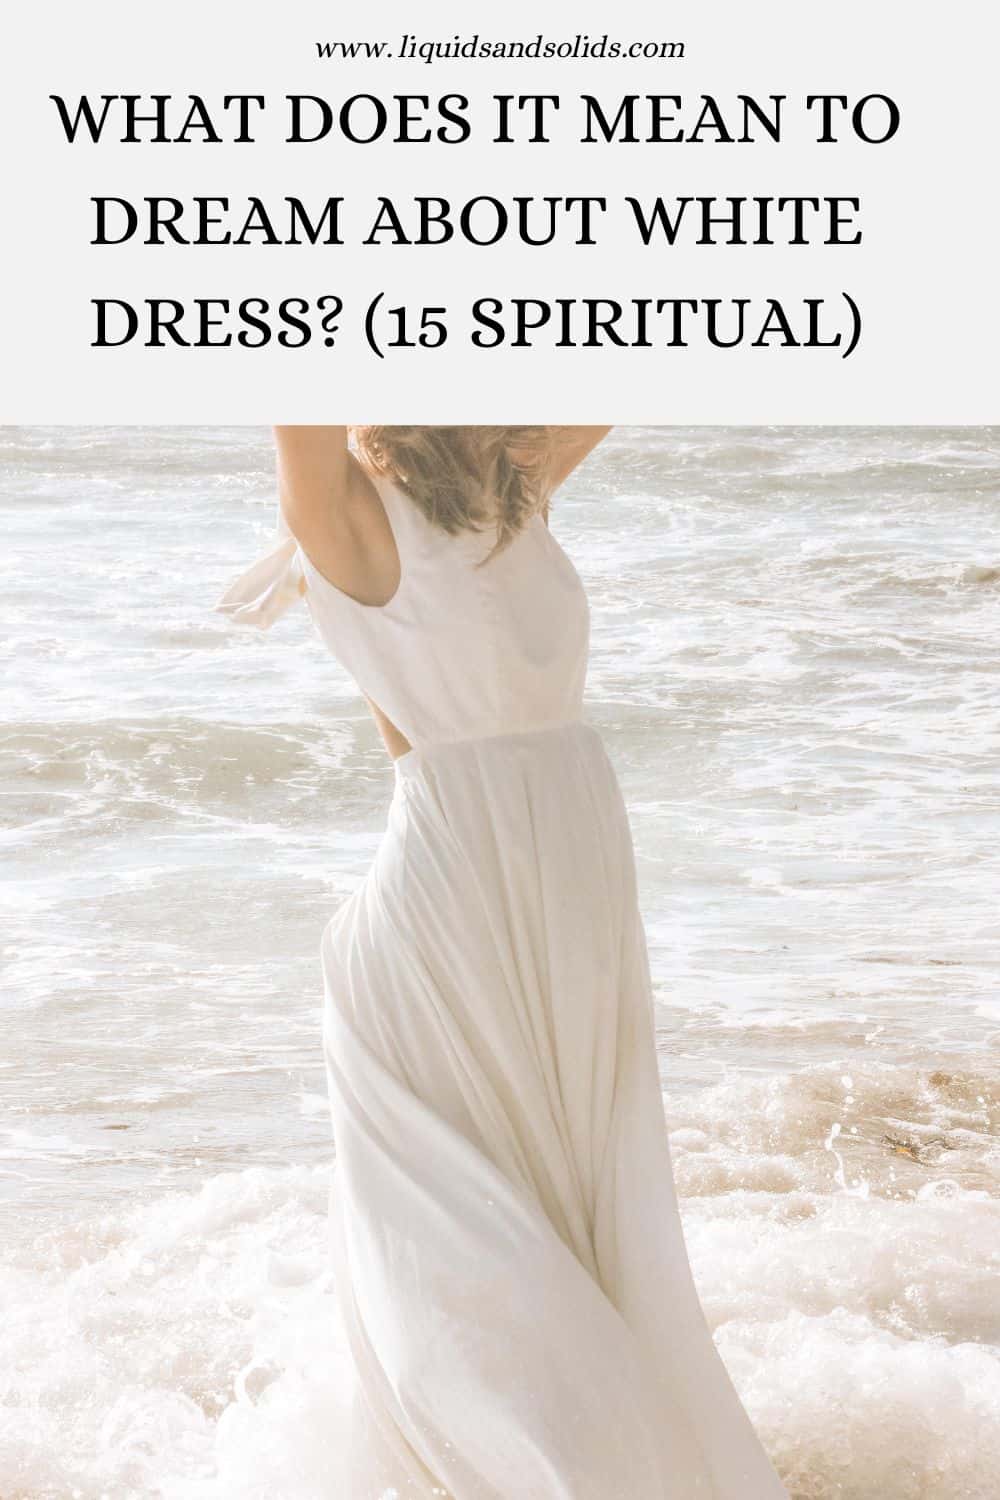 What Does It Mean To Dream About White Dress? (15 Spiritual)